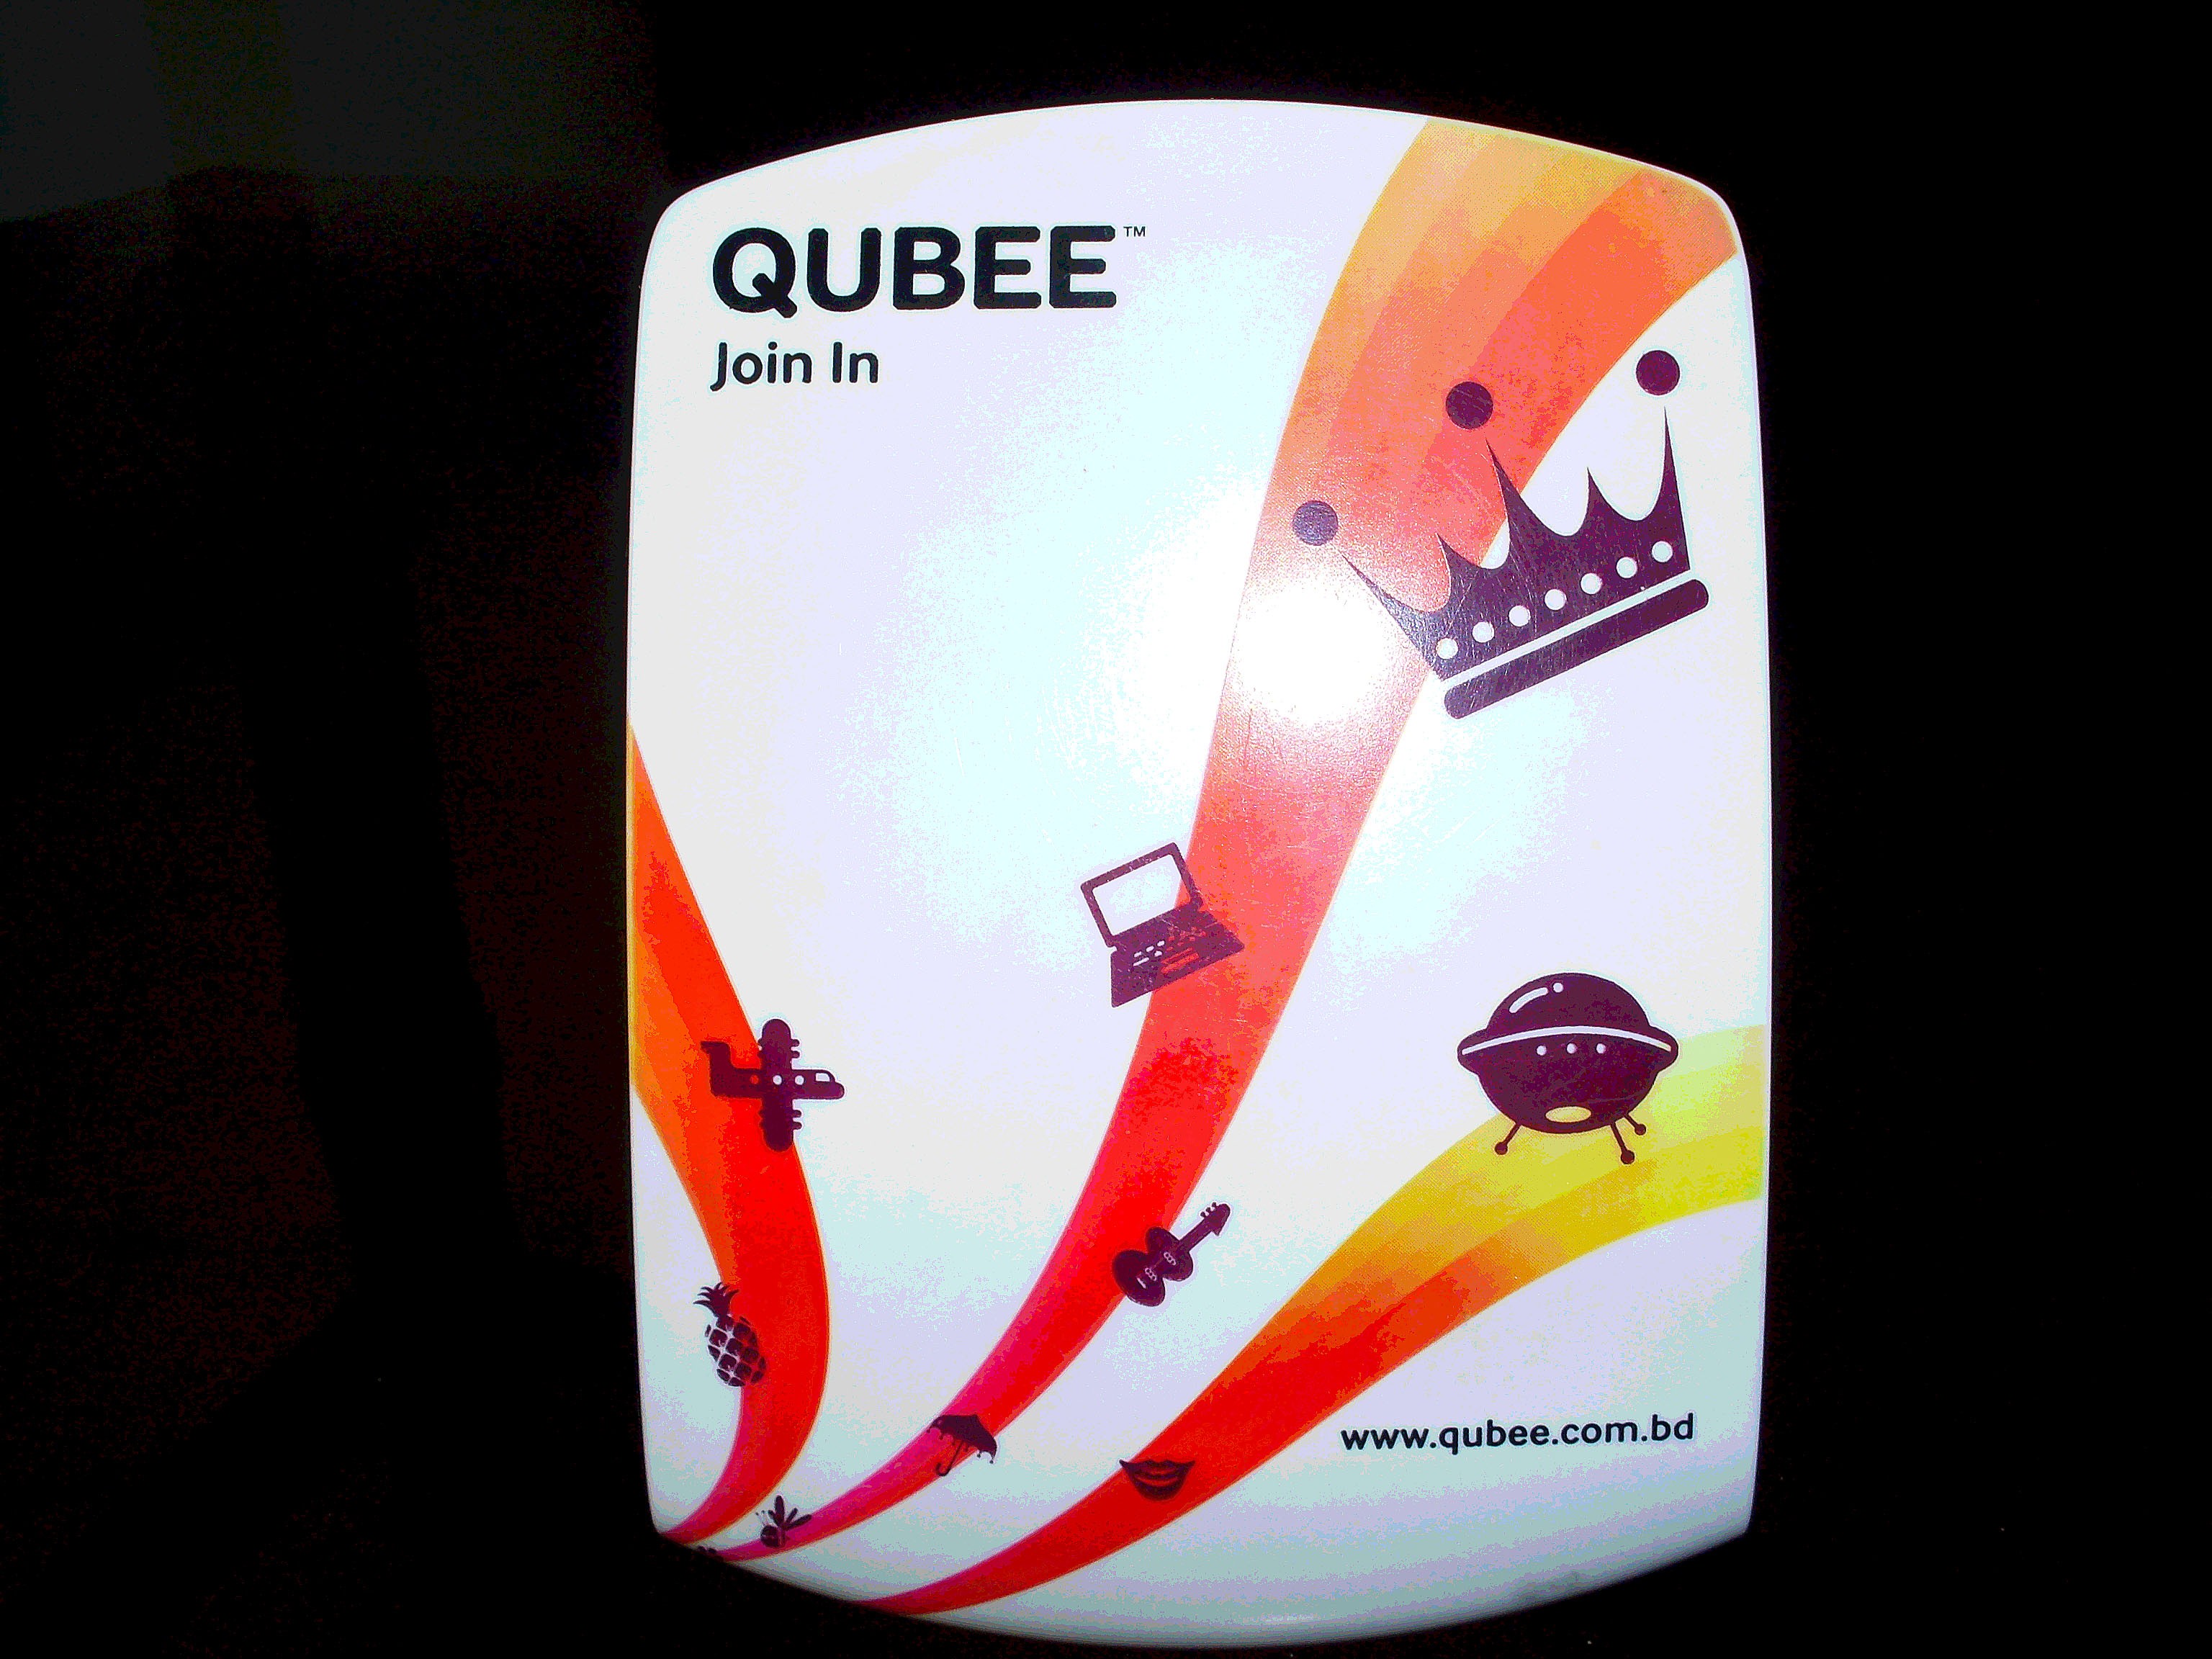 Qubee Shuttle Modem Boxed with Accessories Price Negotiable  large image 0